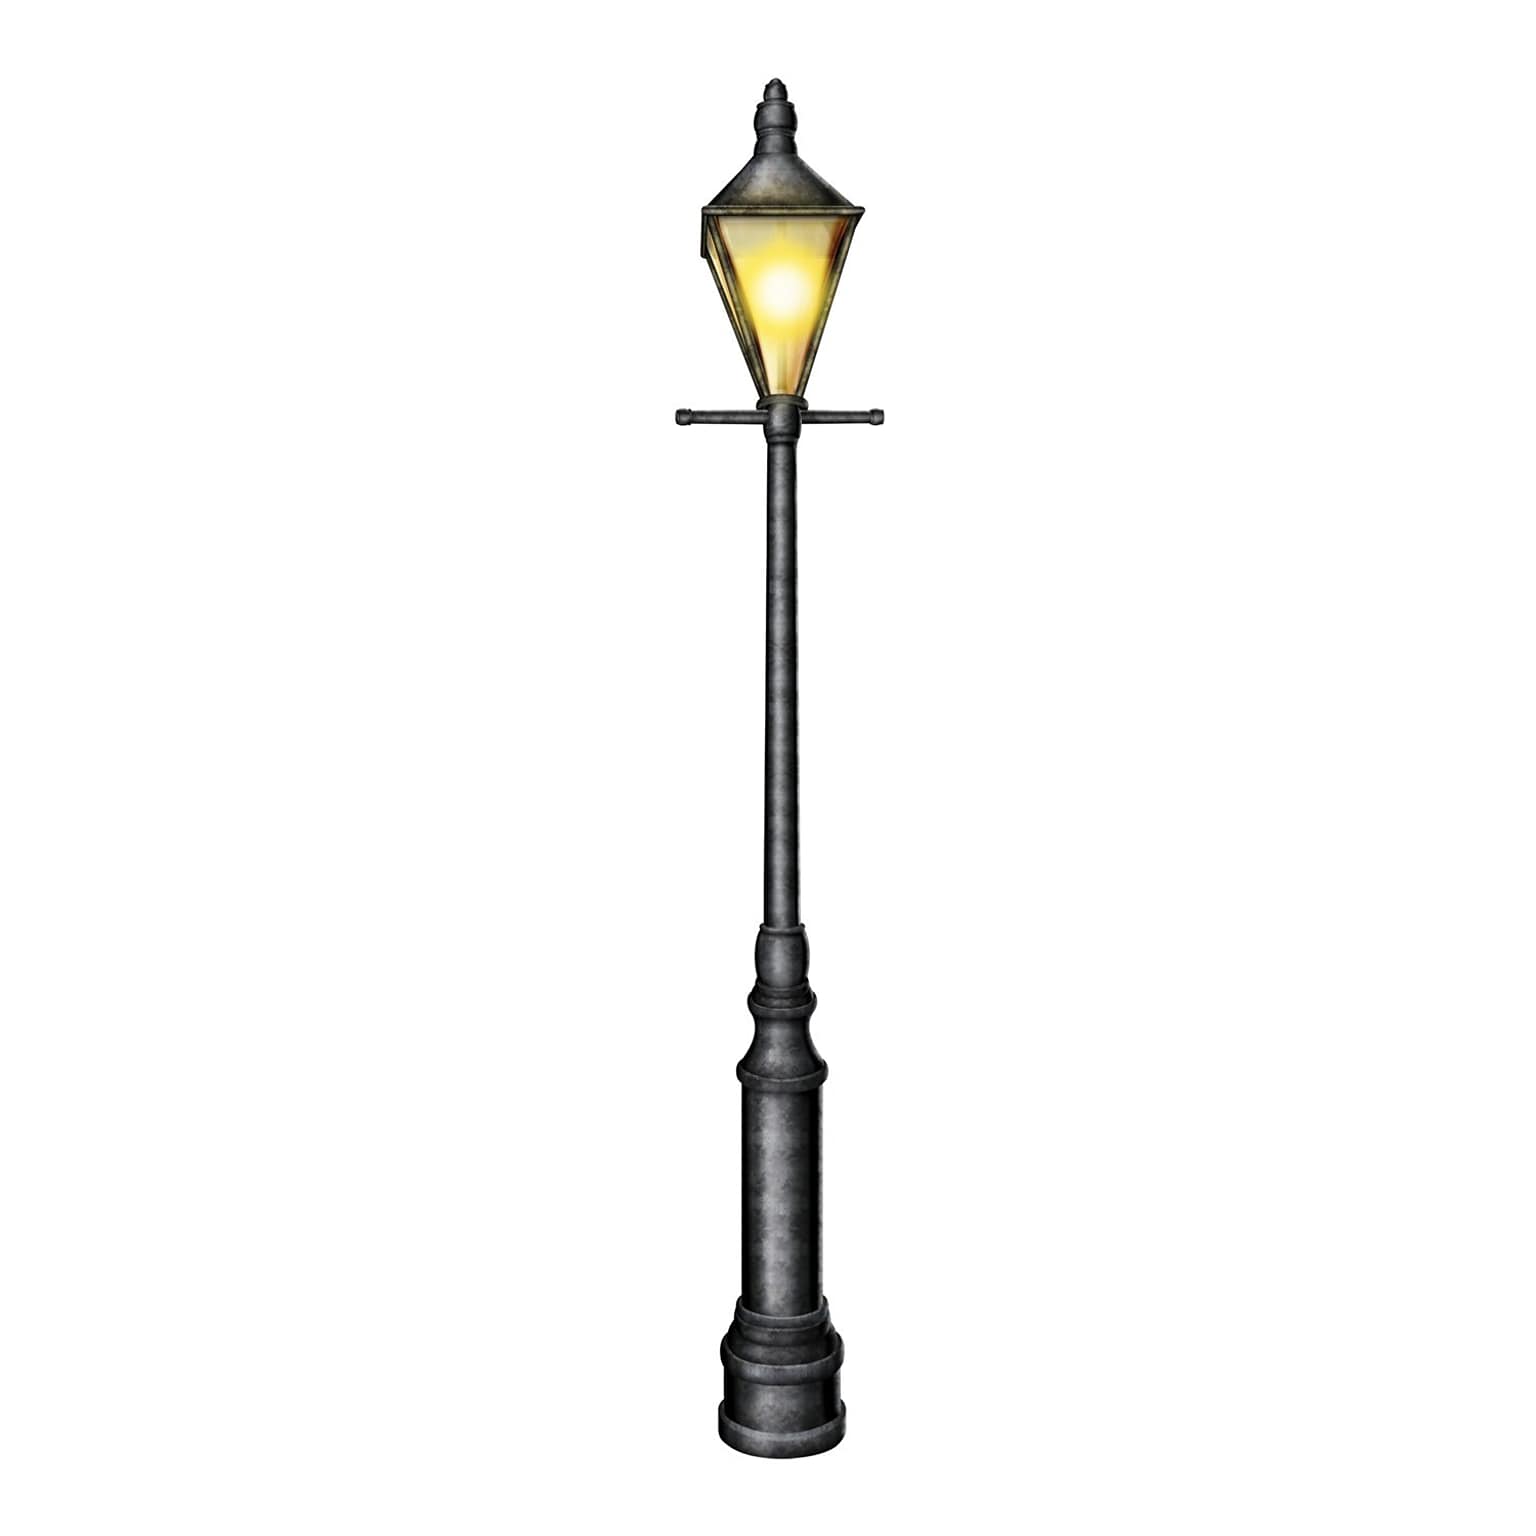 Beistle 6 Jointed Lamppost, 2/Pack